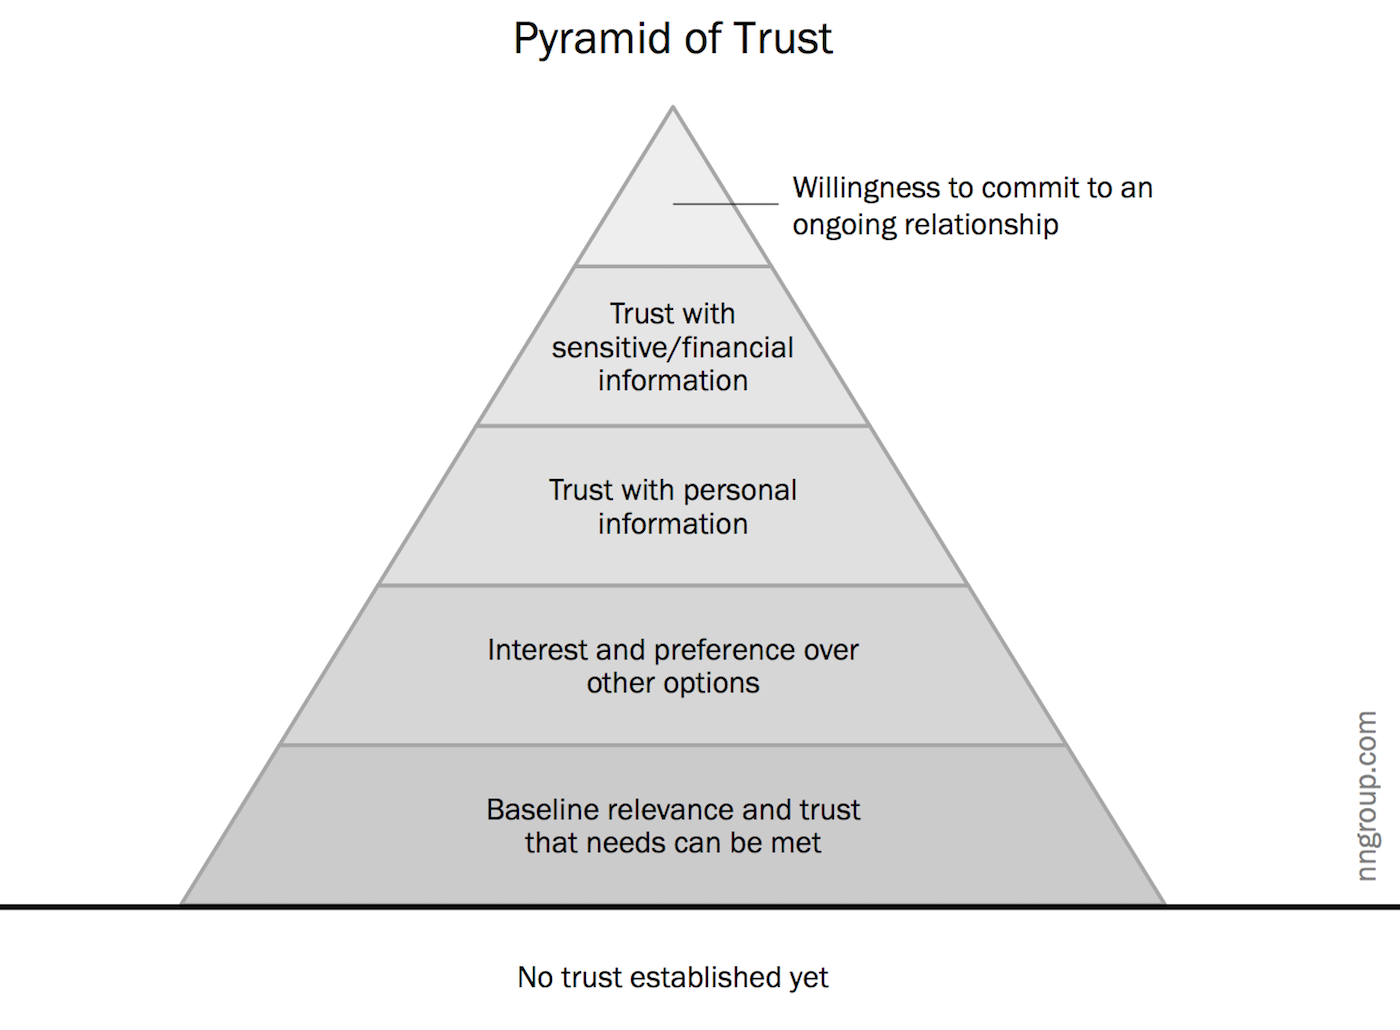 The Pyramid of Trust